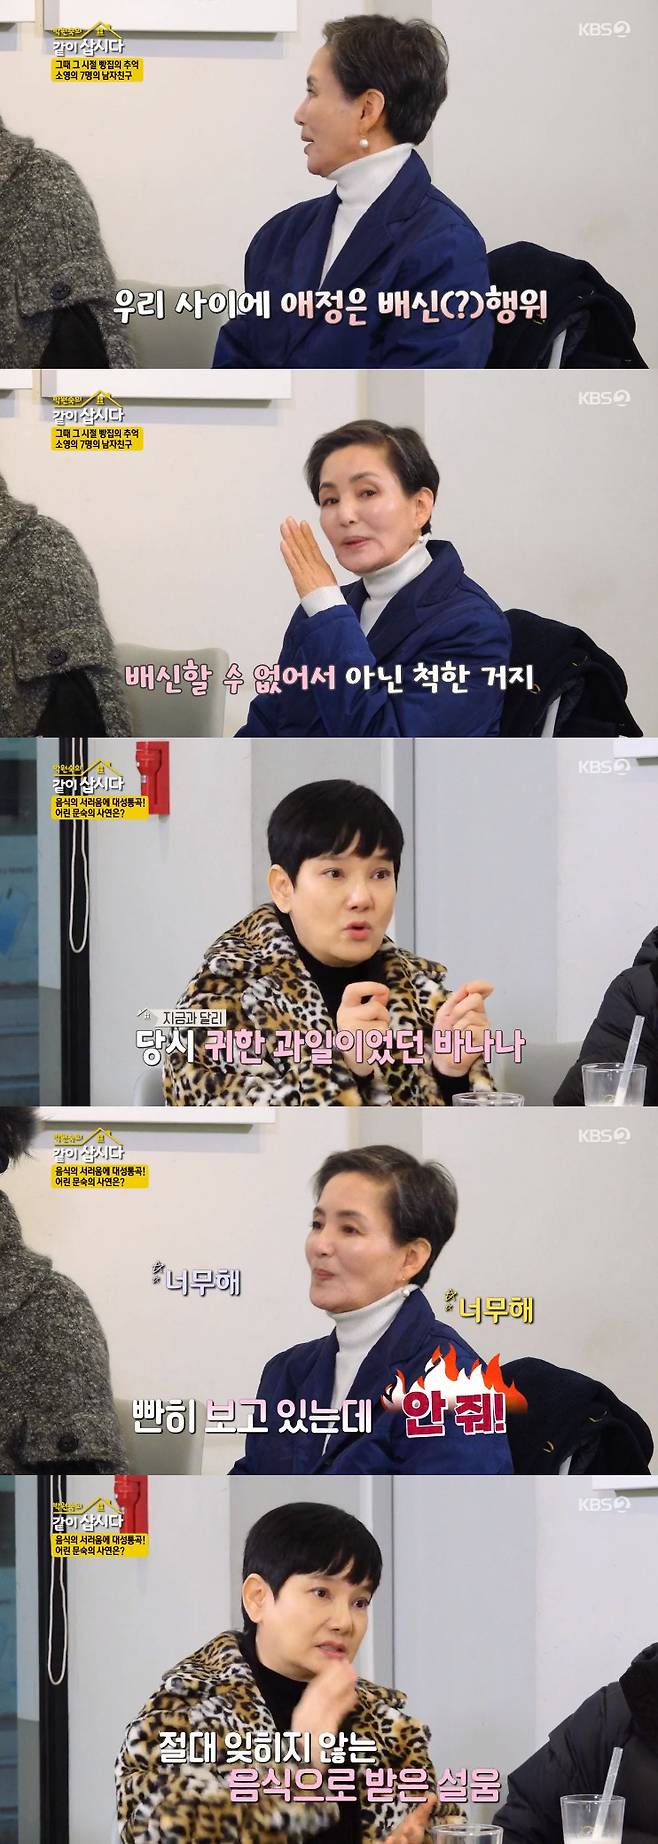 Lets live together Park Won-sook confided in a stupid anecdote that miscalculated the tax.On the 14th broadcast KBS2 Lets get together with Park Won-sook, Sisters who broke the old painting were featured.Hye Eun Yi said, We will break the seal in 2023, and said that we want to accept all of our coastal roads this year.Park Won-sook showed off her granddaughter as she walked along the coast.An mun-suk said, Isnt there something else to brag about? Didnt you say you got straight As? Park Won-sook said, I dont think you look like my grandmother, but she was pleased with her granddaughter.The Sisters went to a bakery where they had been for three generations and tasted milkshakes and bread, and Ahn So-young recalled, I made a lot of bread bets with my boyfriends. When I was a kid, I loved bread so much that I ate 10 of them in my seat.Ahn So-young said, I happened to know them when I was in the academy. Eight people told me to be an unchanging friend and that liking someone was a betrayal. I couldnt say who I liked. But to be honest, you know I actually liked you.I could not talk because I could not betray it, he continued.An mun-suk said, My house was not bad, but when my mother went down from Seoul to Gwangju, my acquaintances looked at me.I do not remember anything else, but the scars on the food are Memory, he said. It was huge to eat bananas because the family members live well.I do not know, but my sister cried, she said. I did not give it to her, but she threw the banana peel toward me. But the young girl scratched the skin with a spoon.The last place to break the old painting is a Chinese restaurant.After eating, Ahn So-young released an episode of United States of America. Ahn So-young said, I went to the United States of America and did a fur trade because I had nothing to do.When I think about it, I remember thinking, I saved money to buy a fur for the holidays and anniversaries. I mix up $ 1 and $ 10. I count the money and go to bed.An mun-suk said, Suddenly I thought, How much do you lend me if you ask me to borrow money because a close person is in a hurry? Ahn So-young said, I do not think I lend.I think I give it because I am sorry when I can not get the money back if I lend it.  I gave a few hundred million. I did not lend it, but I ended up giving it. I did not know it was hard at the time.At that time, it was too ironic. An mun-suk asked, Do you still have contact with him? And Ahn So-young said, Dead. Park Won-sook recalled that she had borrowed money from her best friend. Park Won-sook recalled, I made a lot last year, but I also paid a few hundred million in taxes.The opponent is actor Oh Mi-yeon. Oh Mi-yeon has said that he lent 60 million won to Park Won-sook.Park Won-sook said, I was so distracted after paying the tax. I was relieved at the end of the year, but the bill came in. I did not have any money because I made a mistake in my calculations.I would not have been able to stand up even if it was hard, he said to Oh Mi-yeon.He added, What I realized after experiencing difficulties is that money is a number if its in a bankbook. If you stack it up, its a pile of paper. Its money when you spend it, and I think I should spend it wisely.